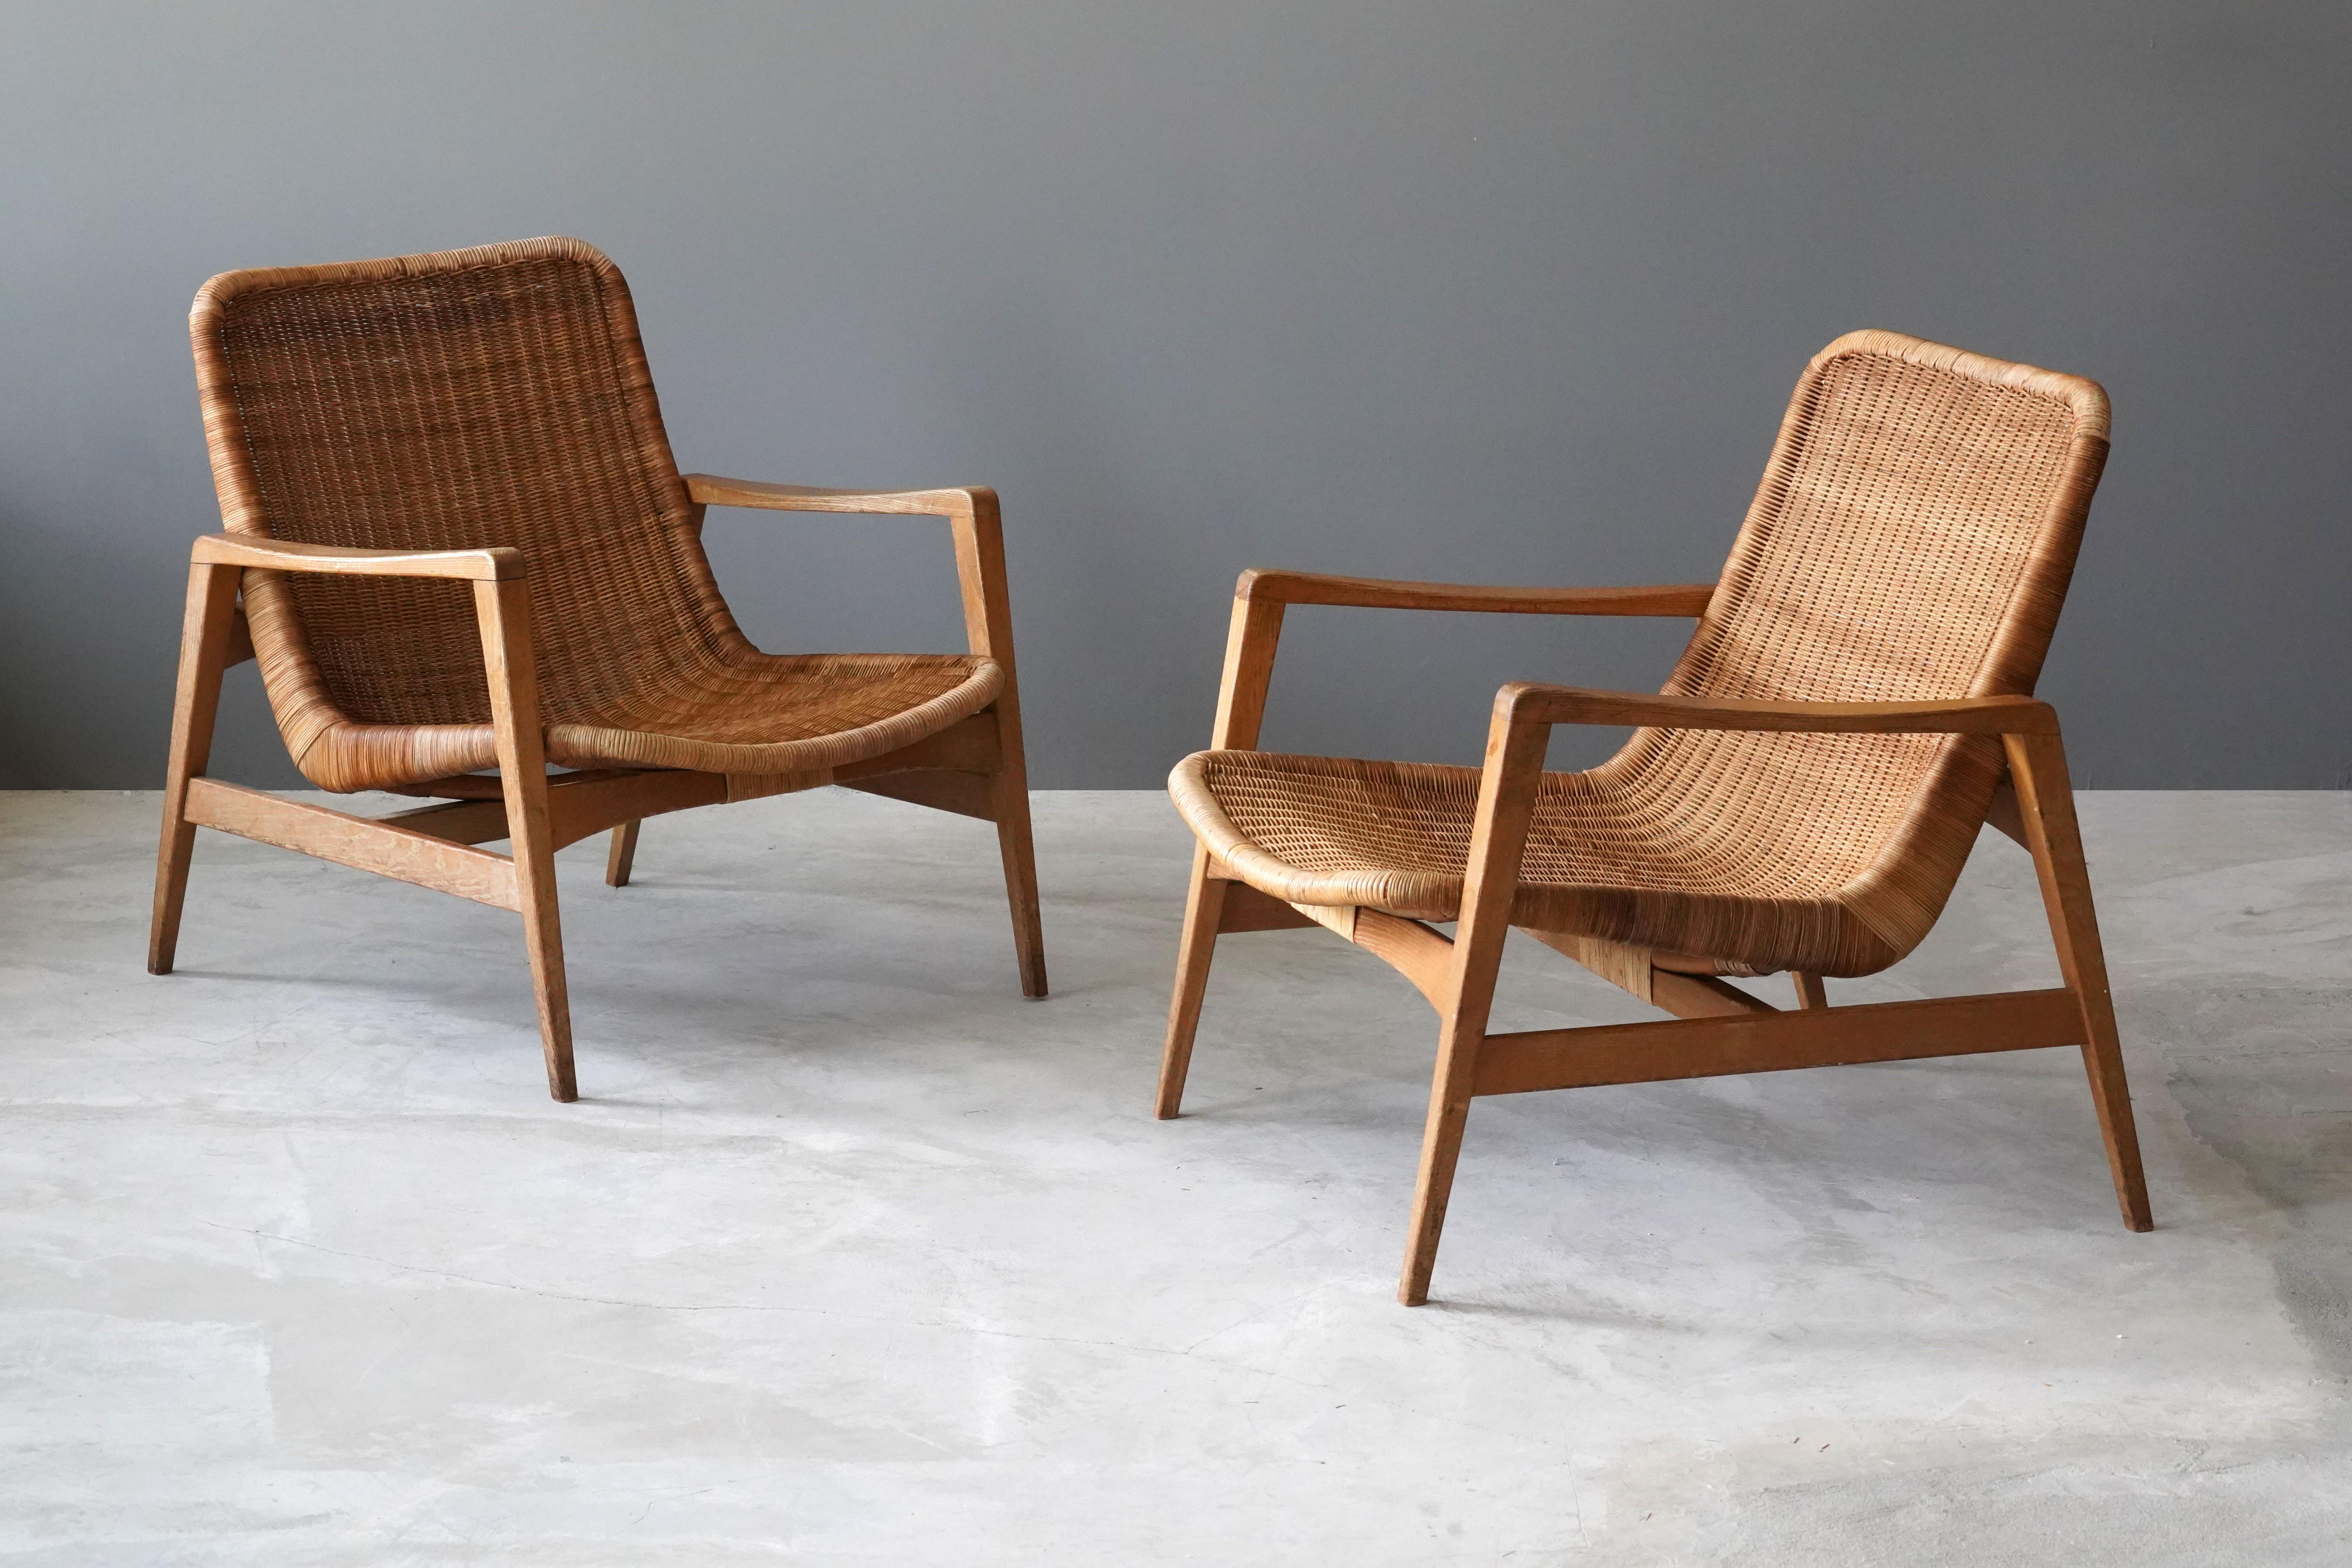 A pair of unusual lounge chairs, production attributed to Yamakawa Rattan, Tokyo, Japan, 1960s. Design attributed to Isamu Kenmochi who designed for the firm. In finely sculpted wood and rattan. 

Other designers of the period include Isamu